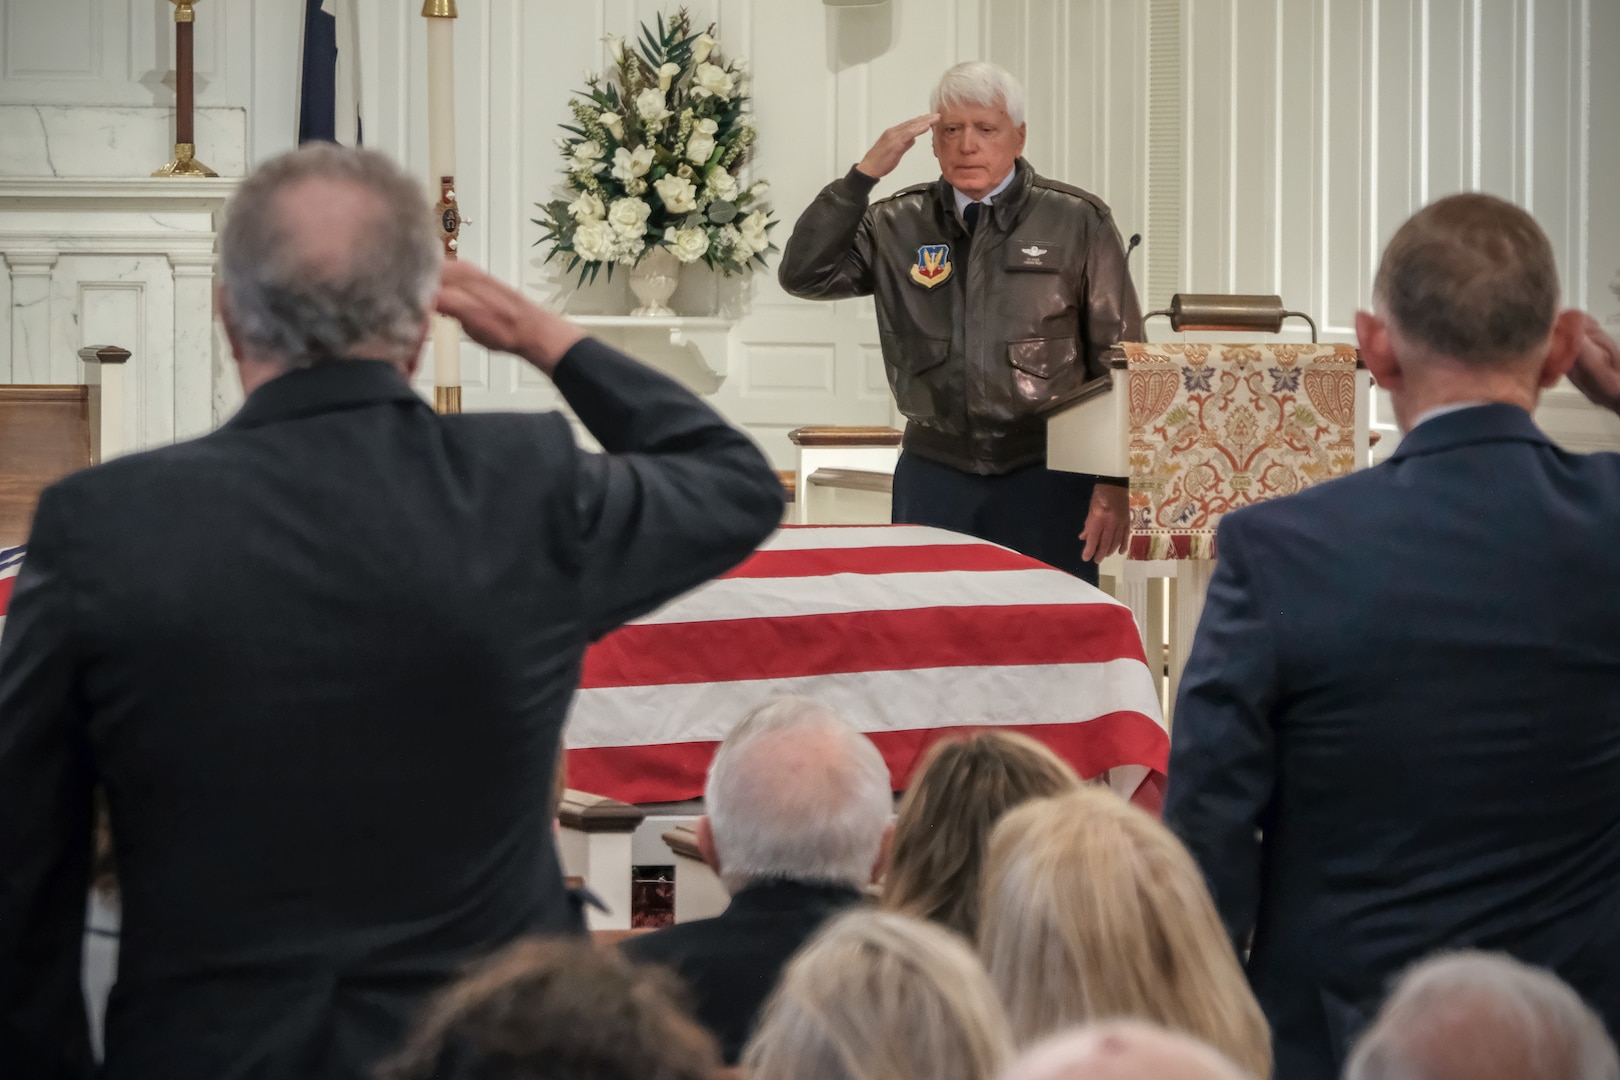 USAF Col. (retired) Edward Sykes leads a “brothers salute” during a funeral service held for Air Force Reserve 1st Lt. David T. Dinan, III, on April 25, 2018 at Arlington National Cemetery. Lt. Dinan was shot down and lost in Laos in 1969. DPAA accounted for Lt. Dinan on Aug. 7, 2017 after conducting several investigation missions that led to the recovery of his remains. (DPAA photo by Mr. Lee O. Tucker)